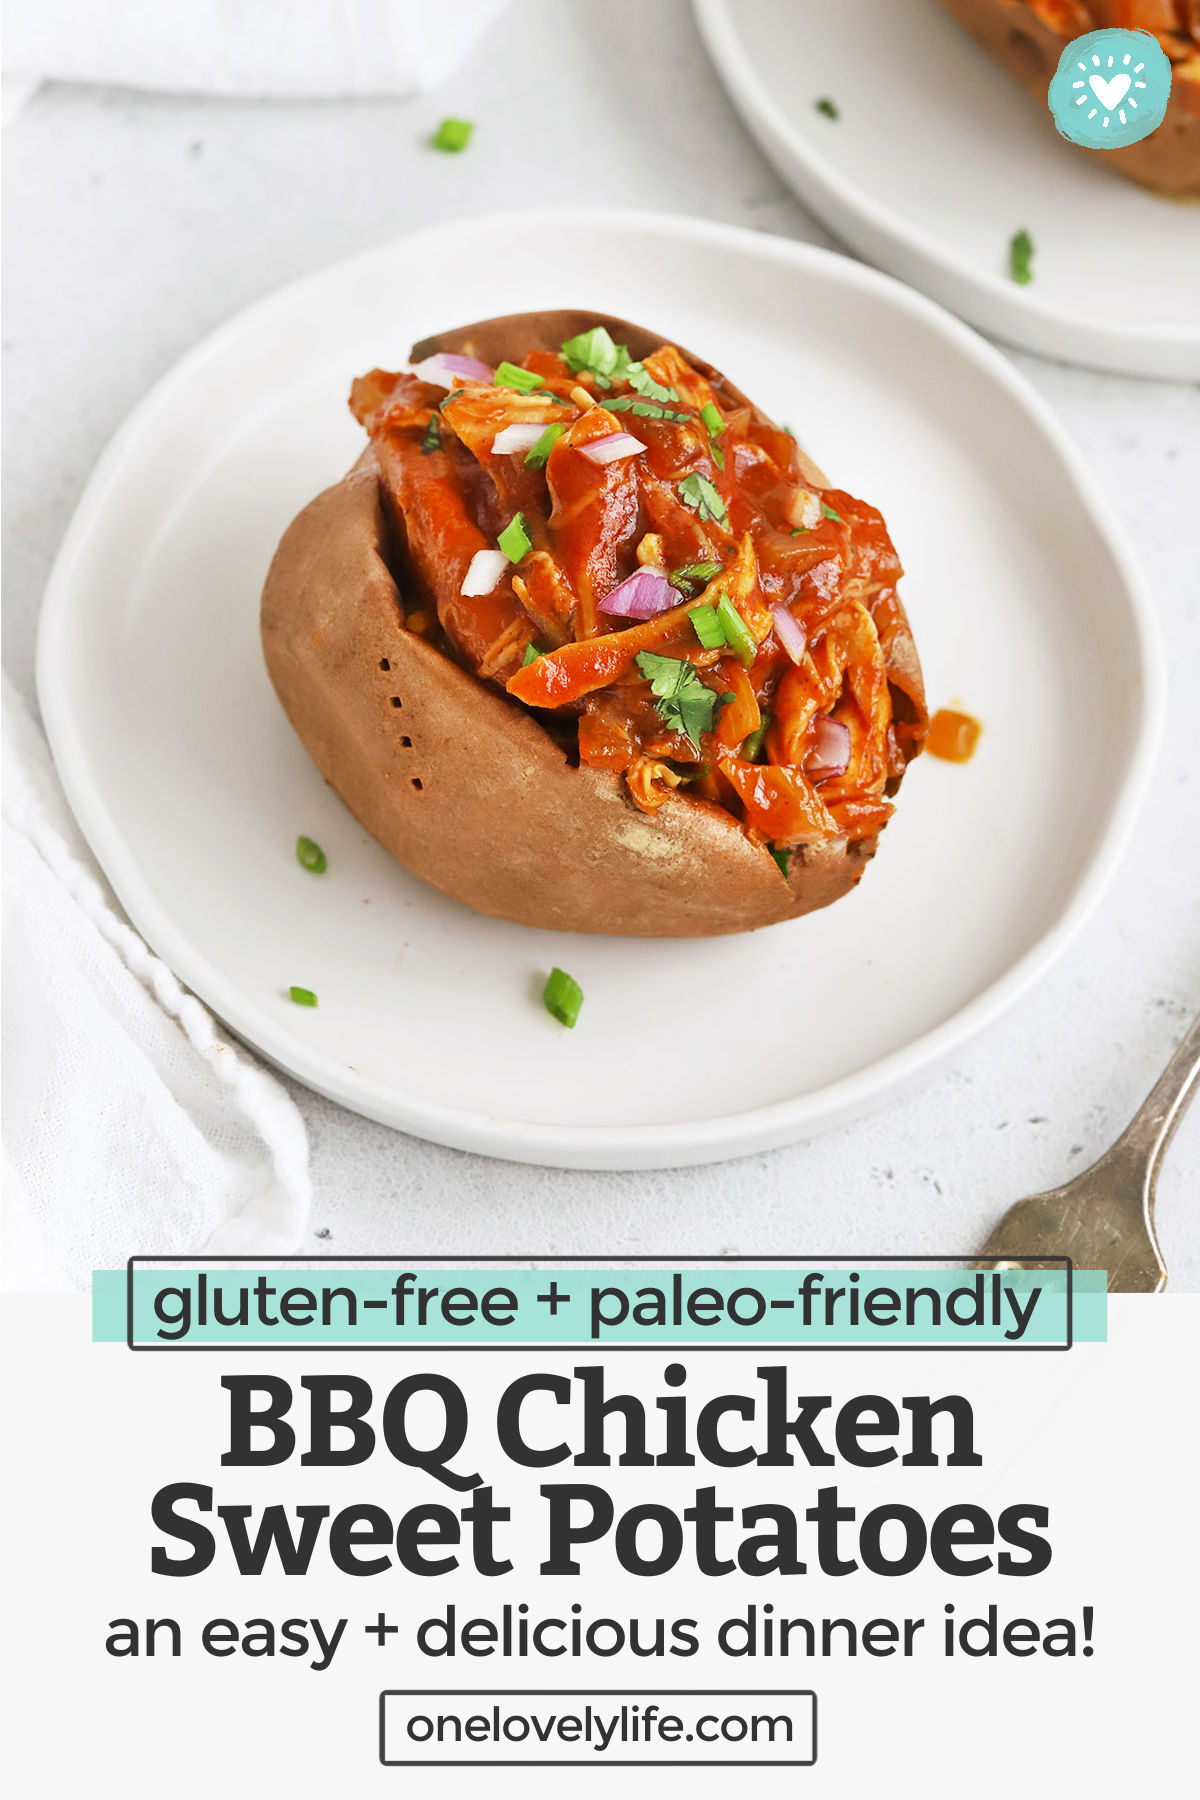 BBQ Chicken Stuffed Sweet Potatoes - Baked sweet potatoes stuffed with tender barbecue chicken and topped with goodies. We love this easy dinner! (Gluten-Free, Paleo, Whole30 Friendly) // Barbecue Chicken Stuffed Sweet Potatoes // Barbecue Sweet Potatoes // Stuffed Sweet Potatoes // Baked Sweet Potato Toppings #paleo #sweetpotato #bakedpotatoe #whole30 #glutenfree #bbq